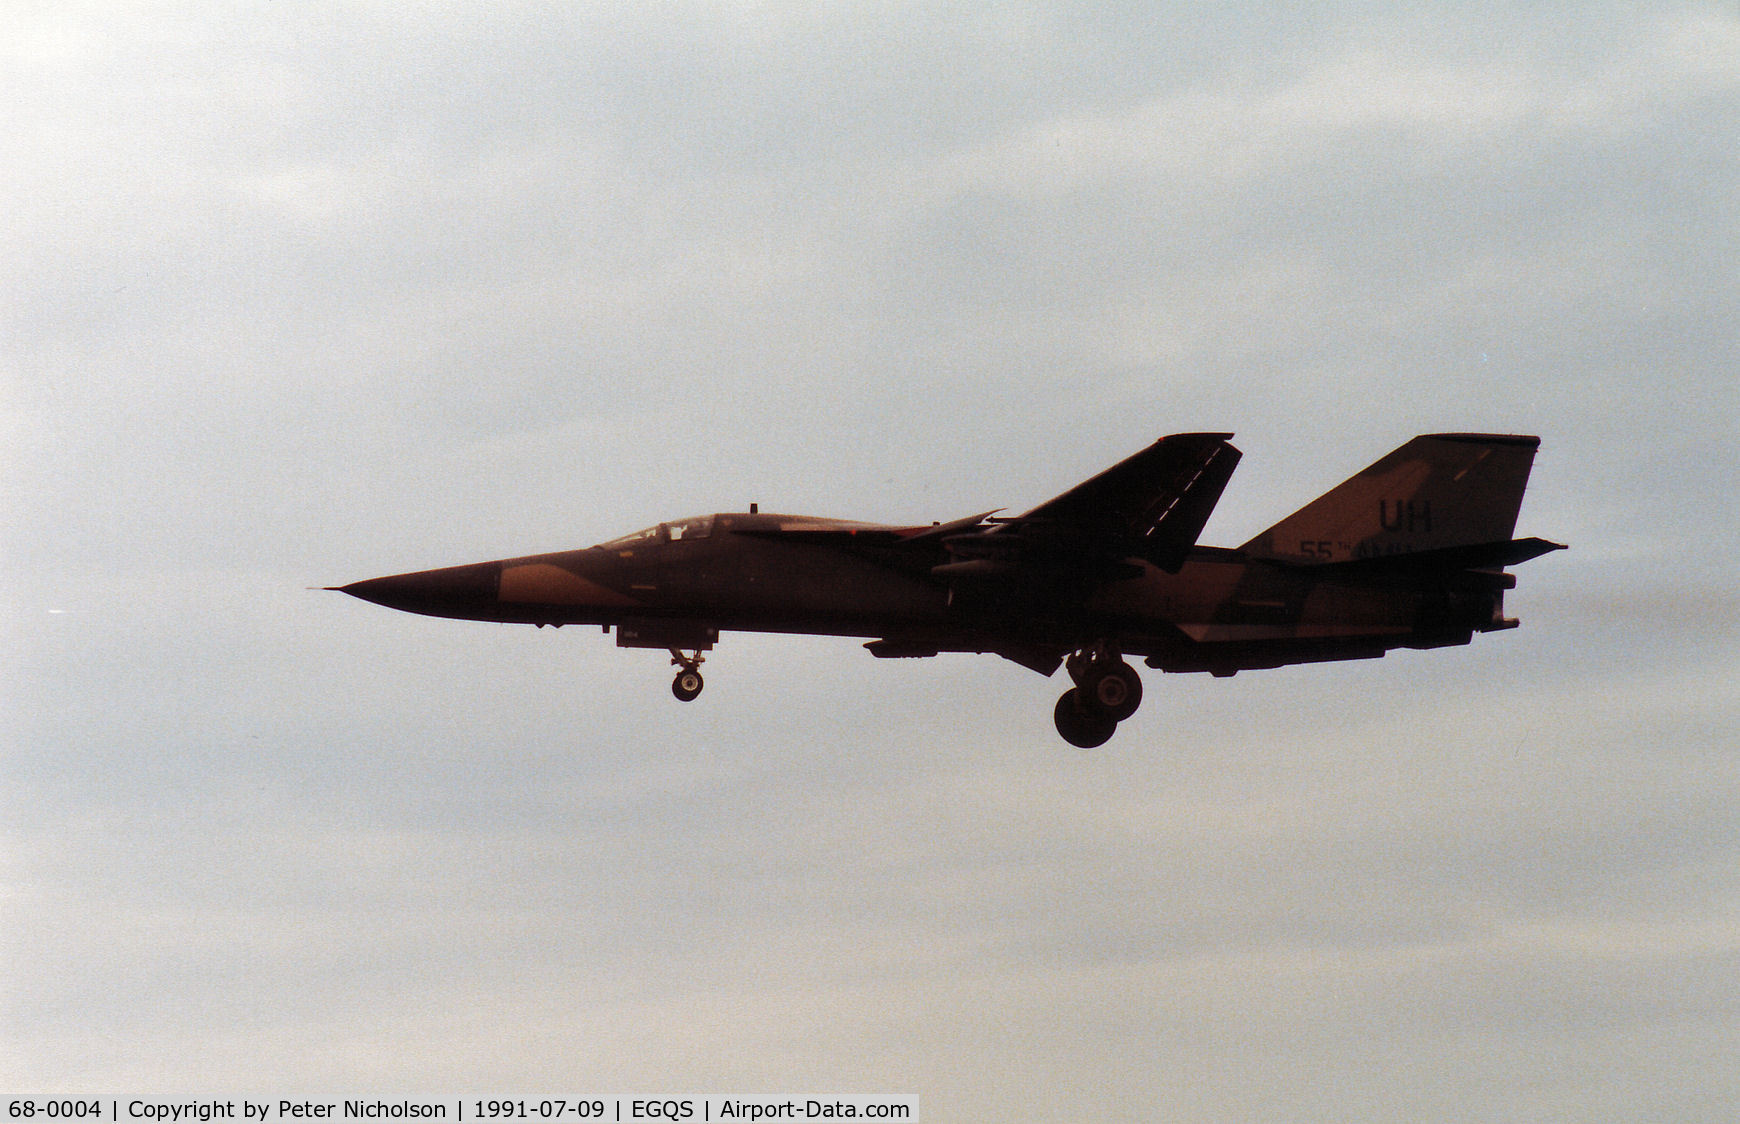 68-0004, 1968 General Dynamics F-111E Aardvark C/N A1-173, F-111E, callsign Acey 22, of 55th Tactical Fighter Squadron/20th Tactical Fighter Wing on a practice approach to RAF Lossiemouth in the Summer of 1991.